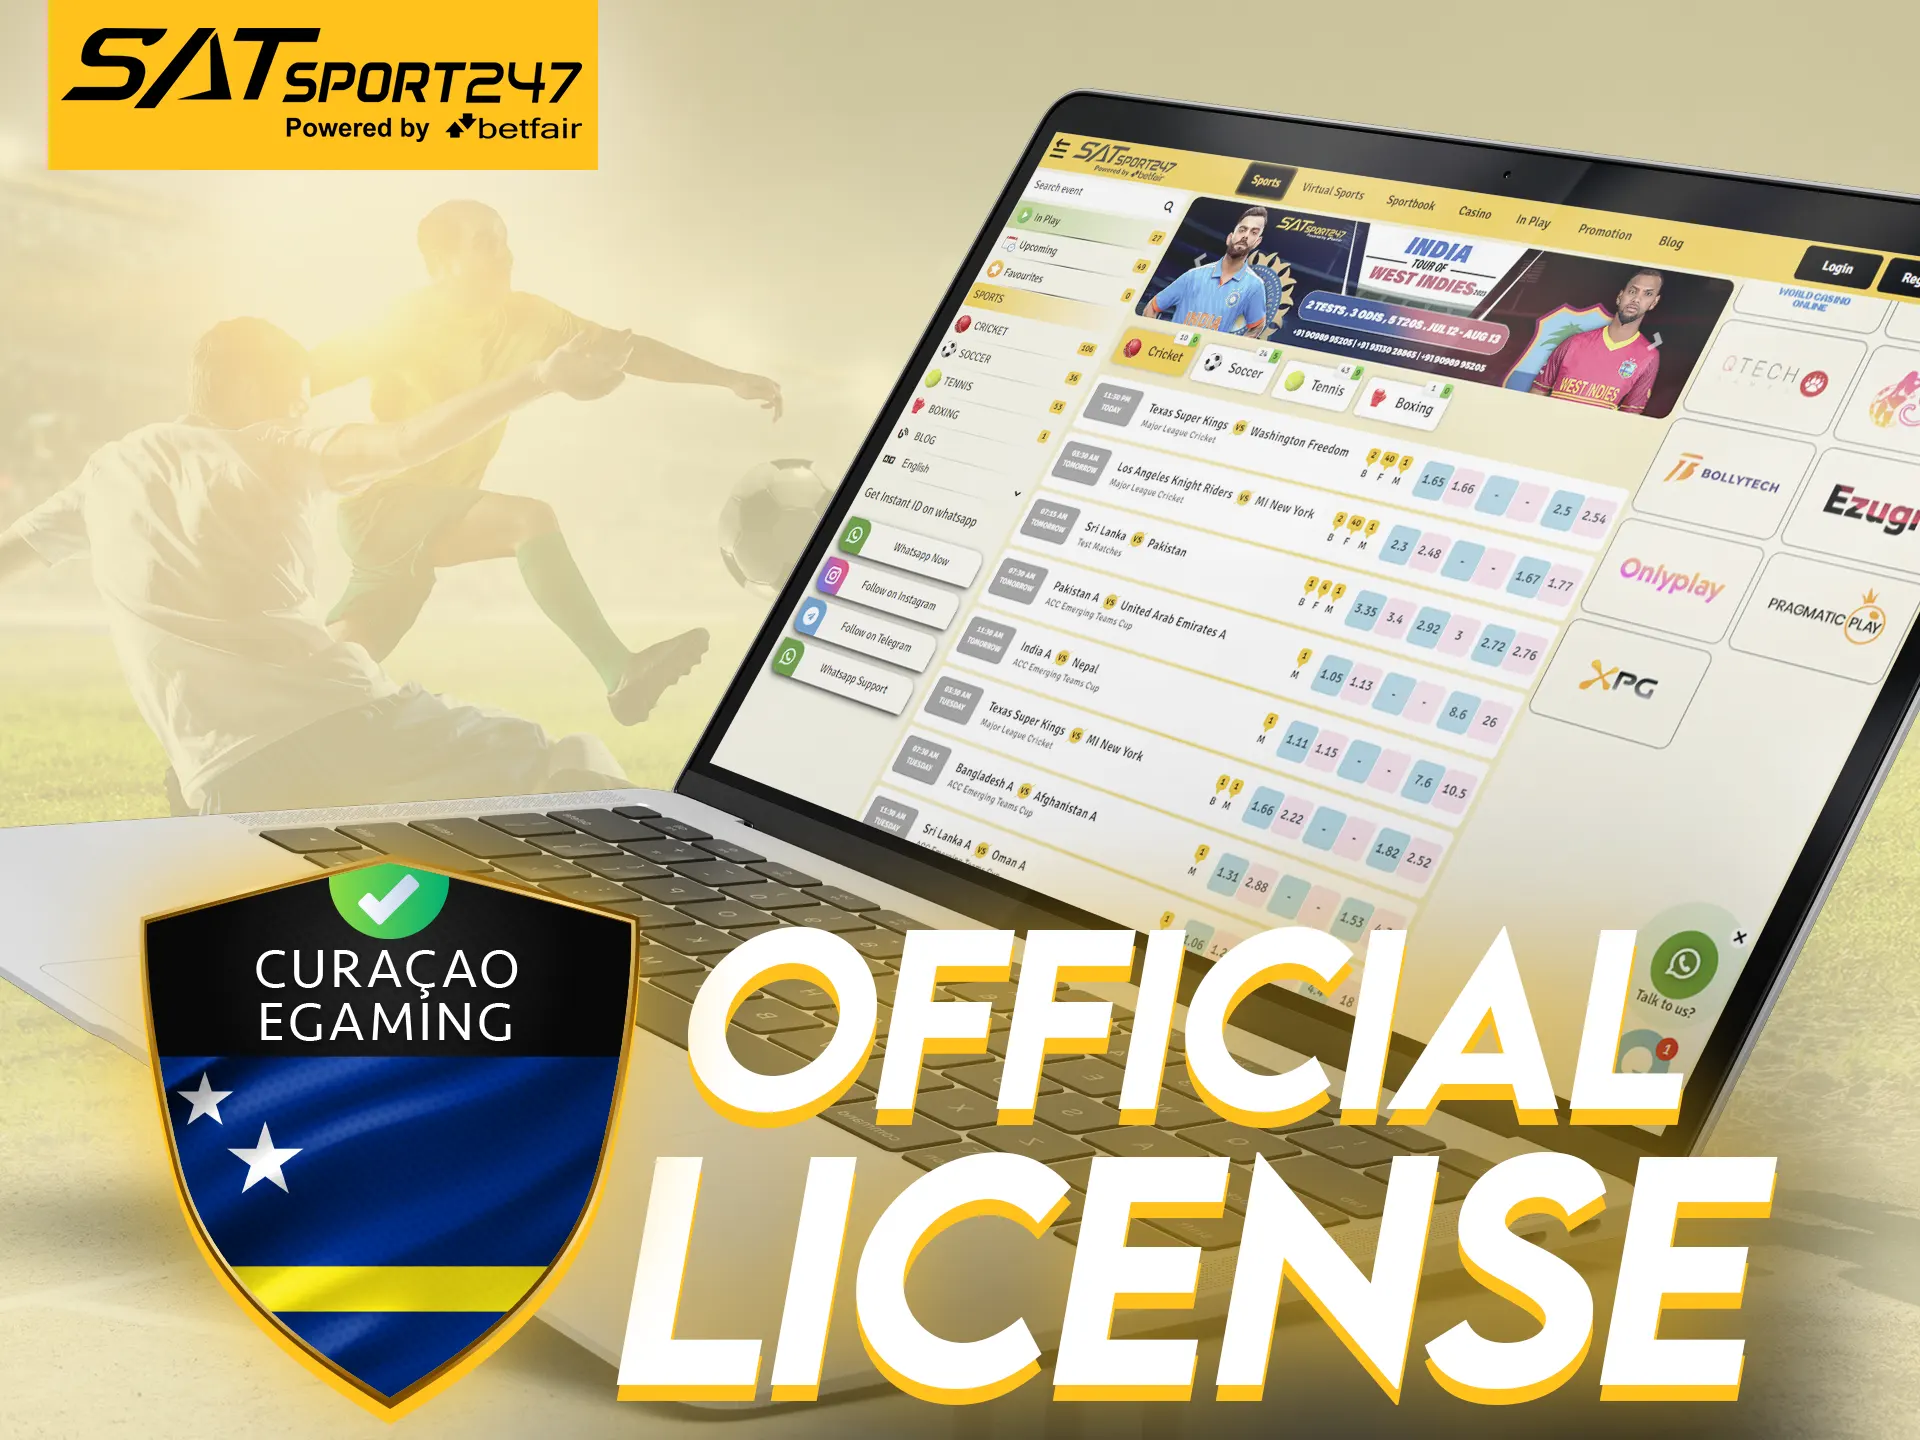 Satsport247 is officially licensed and safe for players.